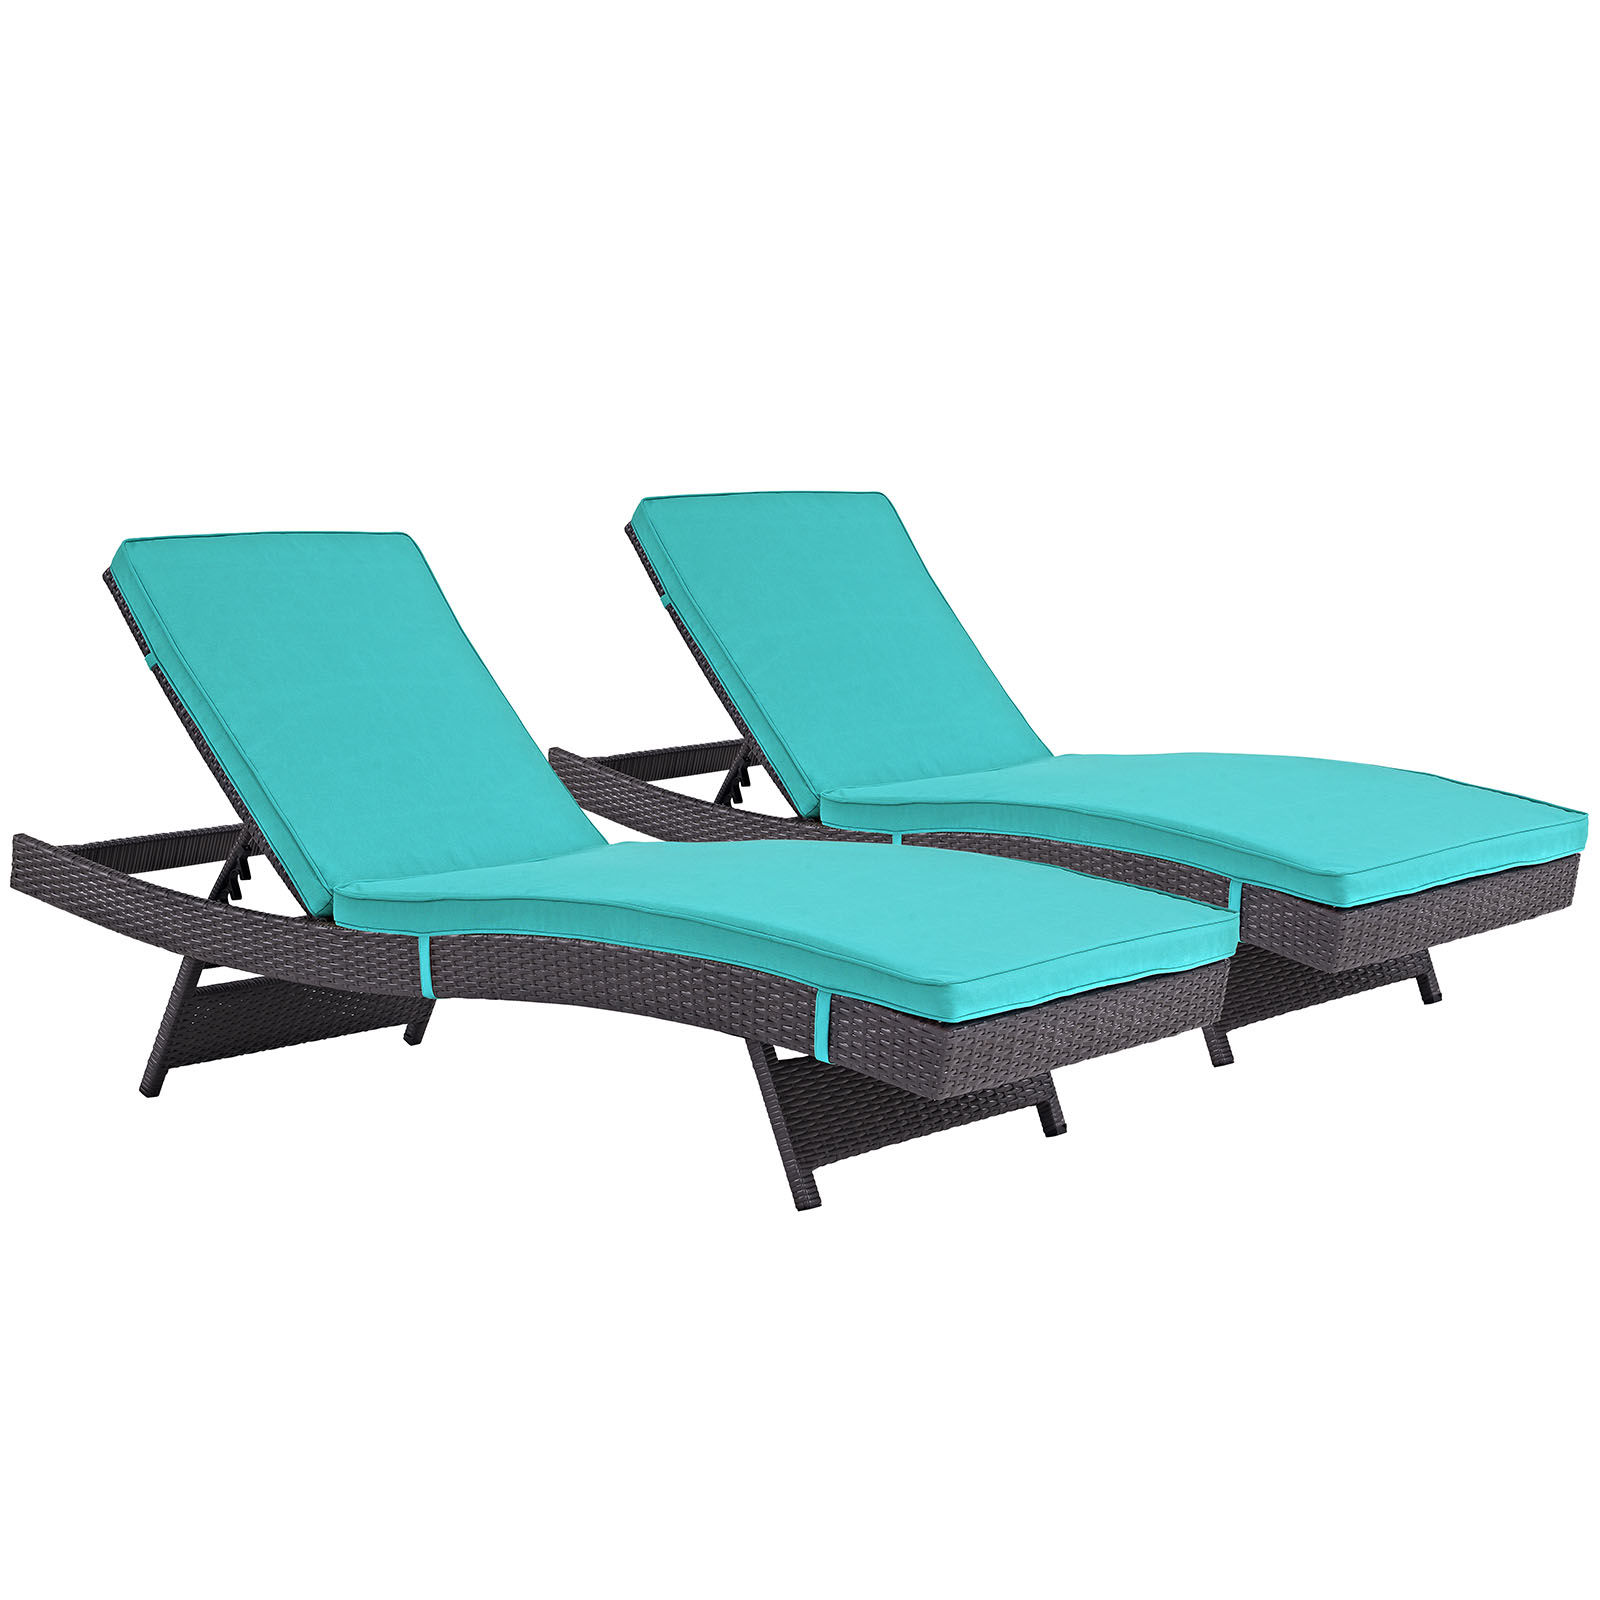 Modern Contemporary Urban Design Outdoor Patio Balcony Chaise Lounge Chair ( Set of 2), Blue, Rattan - image 1 of 4